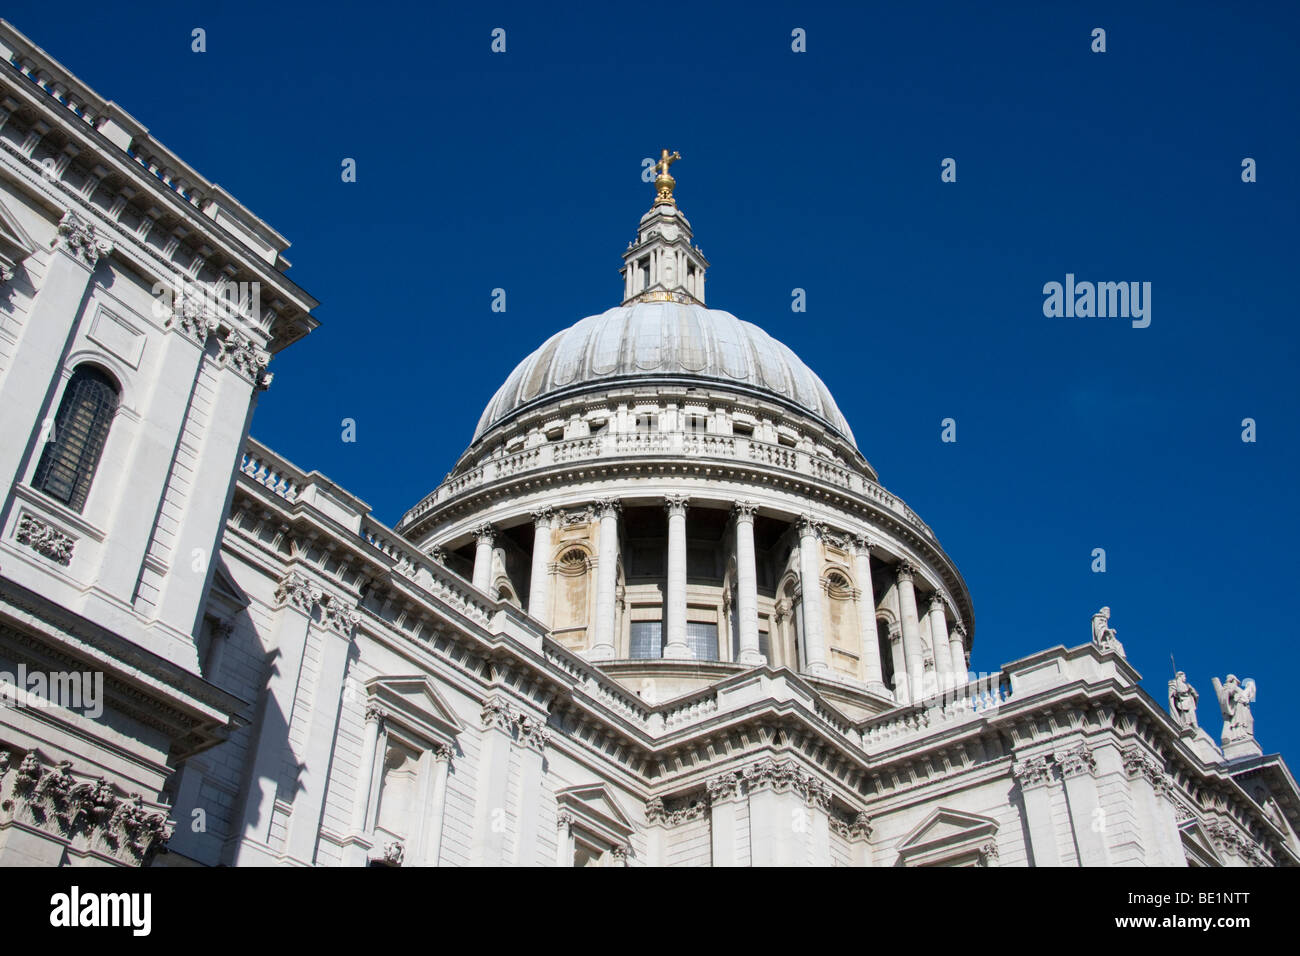 Dome St Pauls Cathedral London England Stock Photo